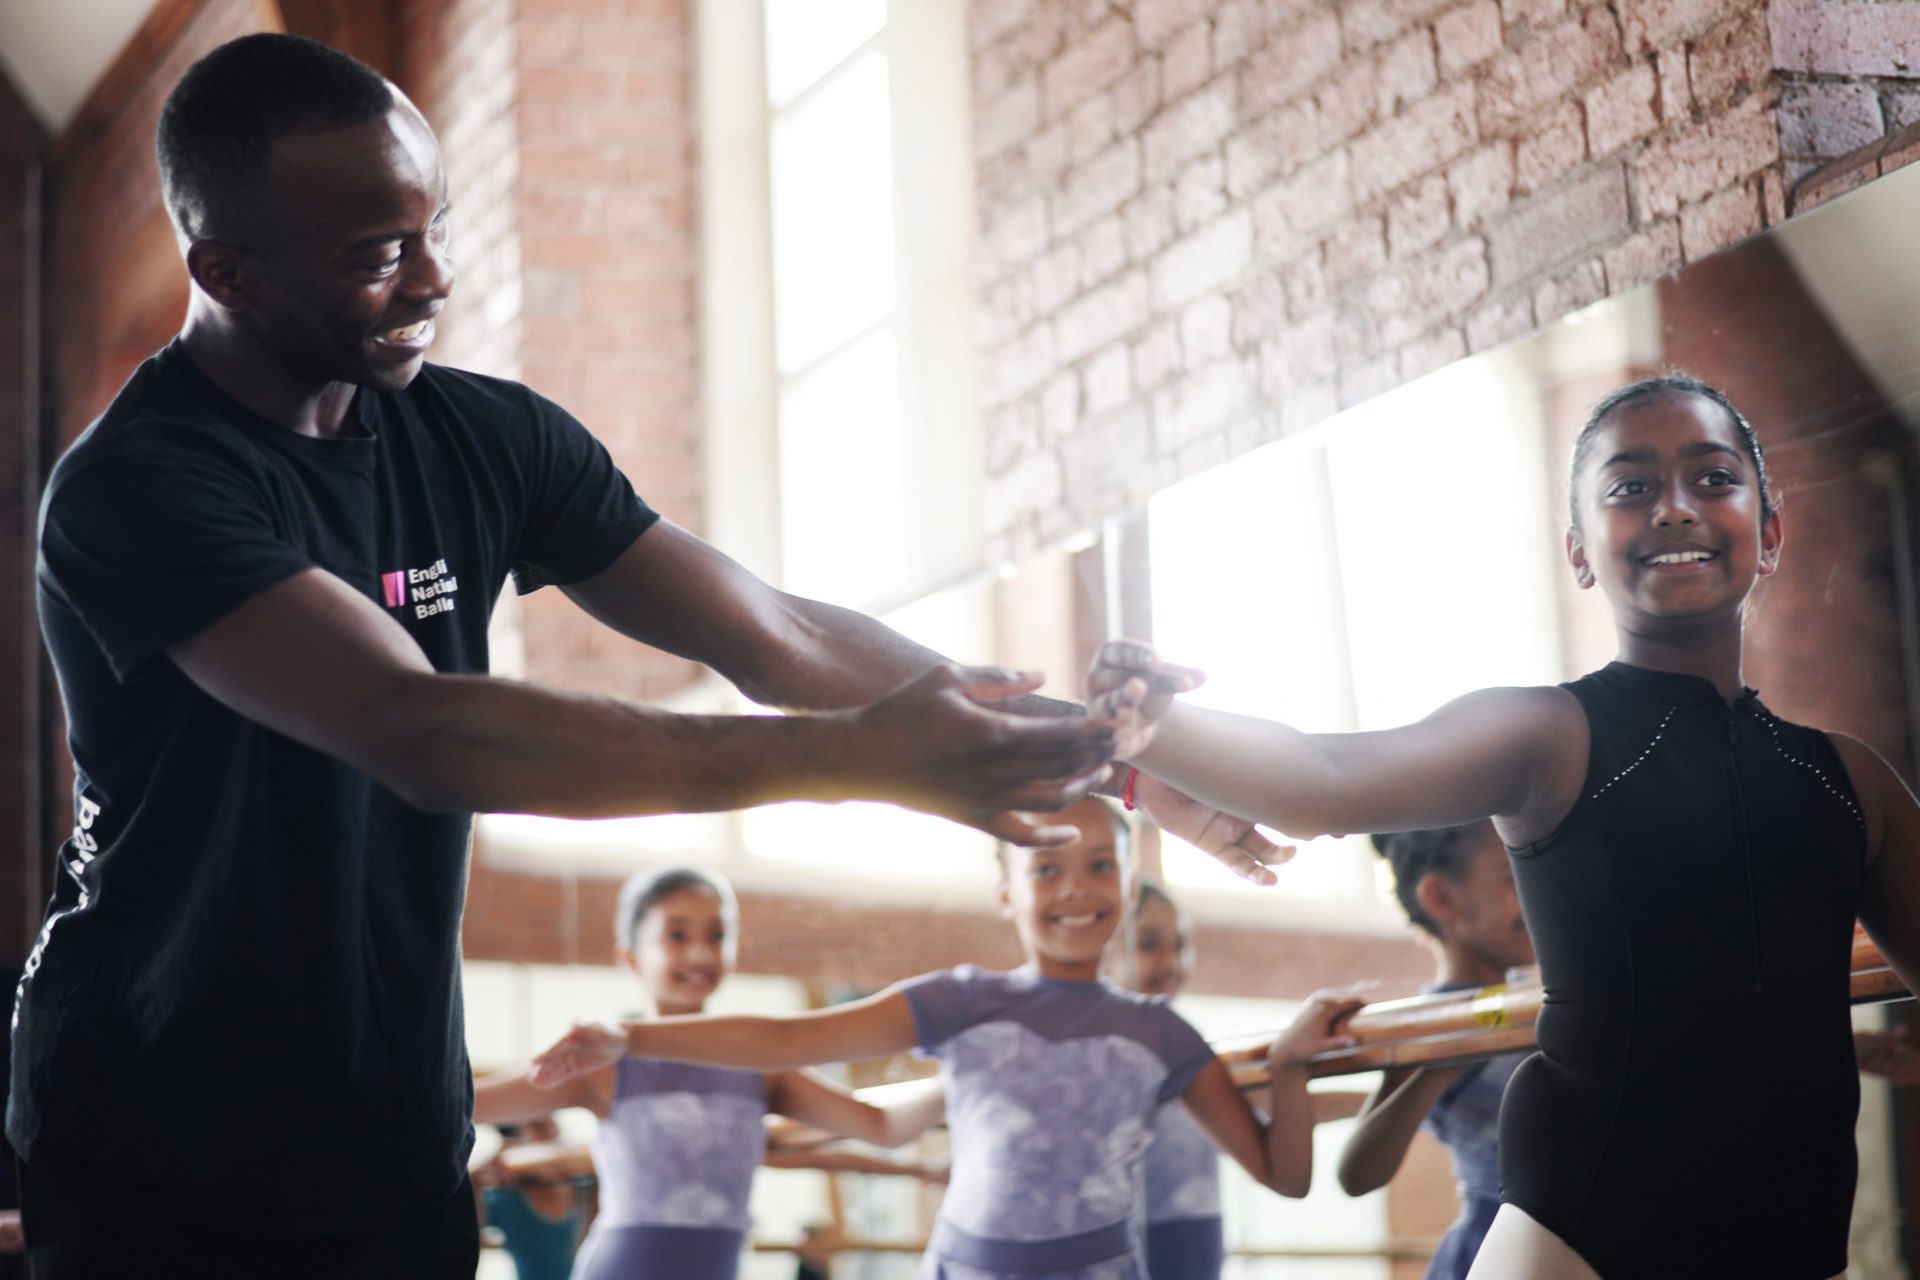 Ballet Futures Facilitator, Shevelle Dynott, leads a class with students of Dupont Dance Stage School in Leicester